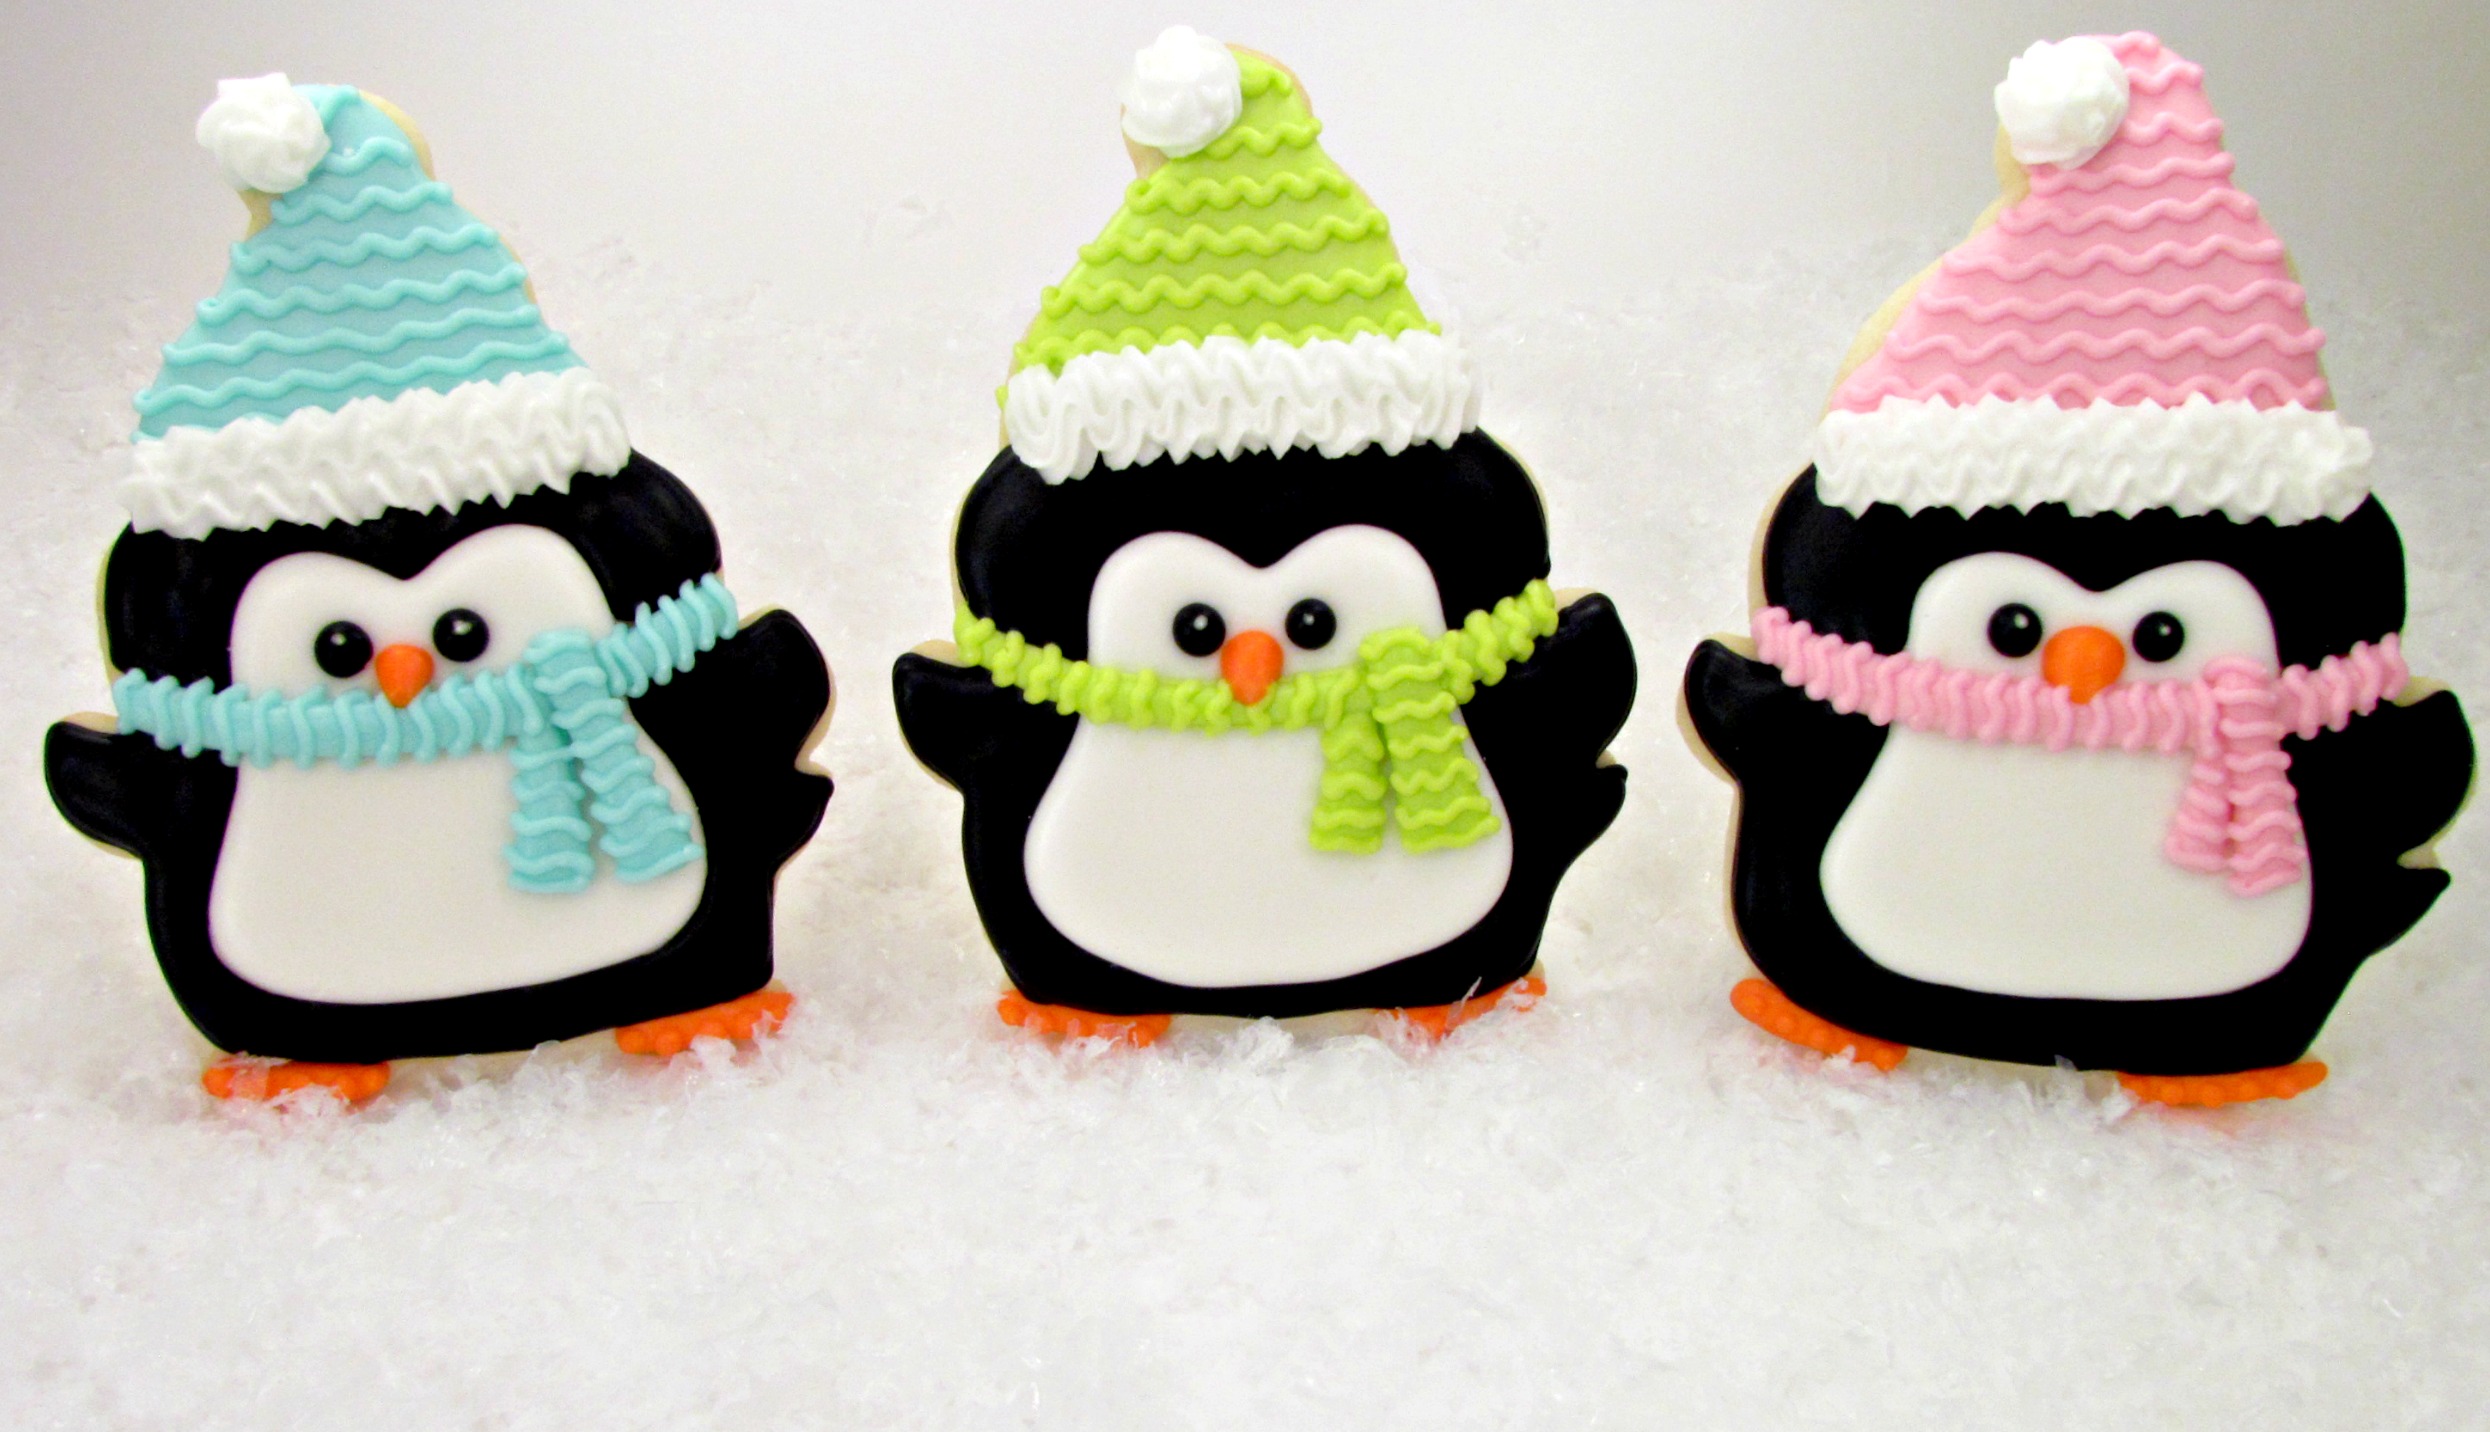 Penguin Cookies by The Bearfoot Baker